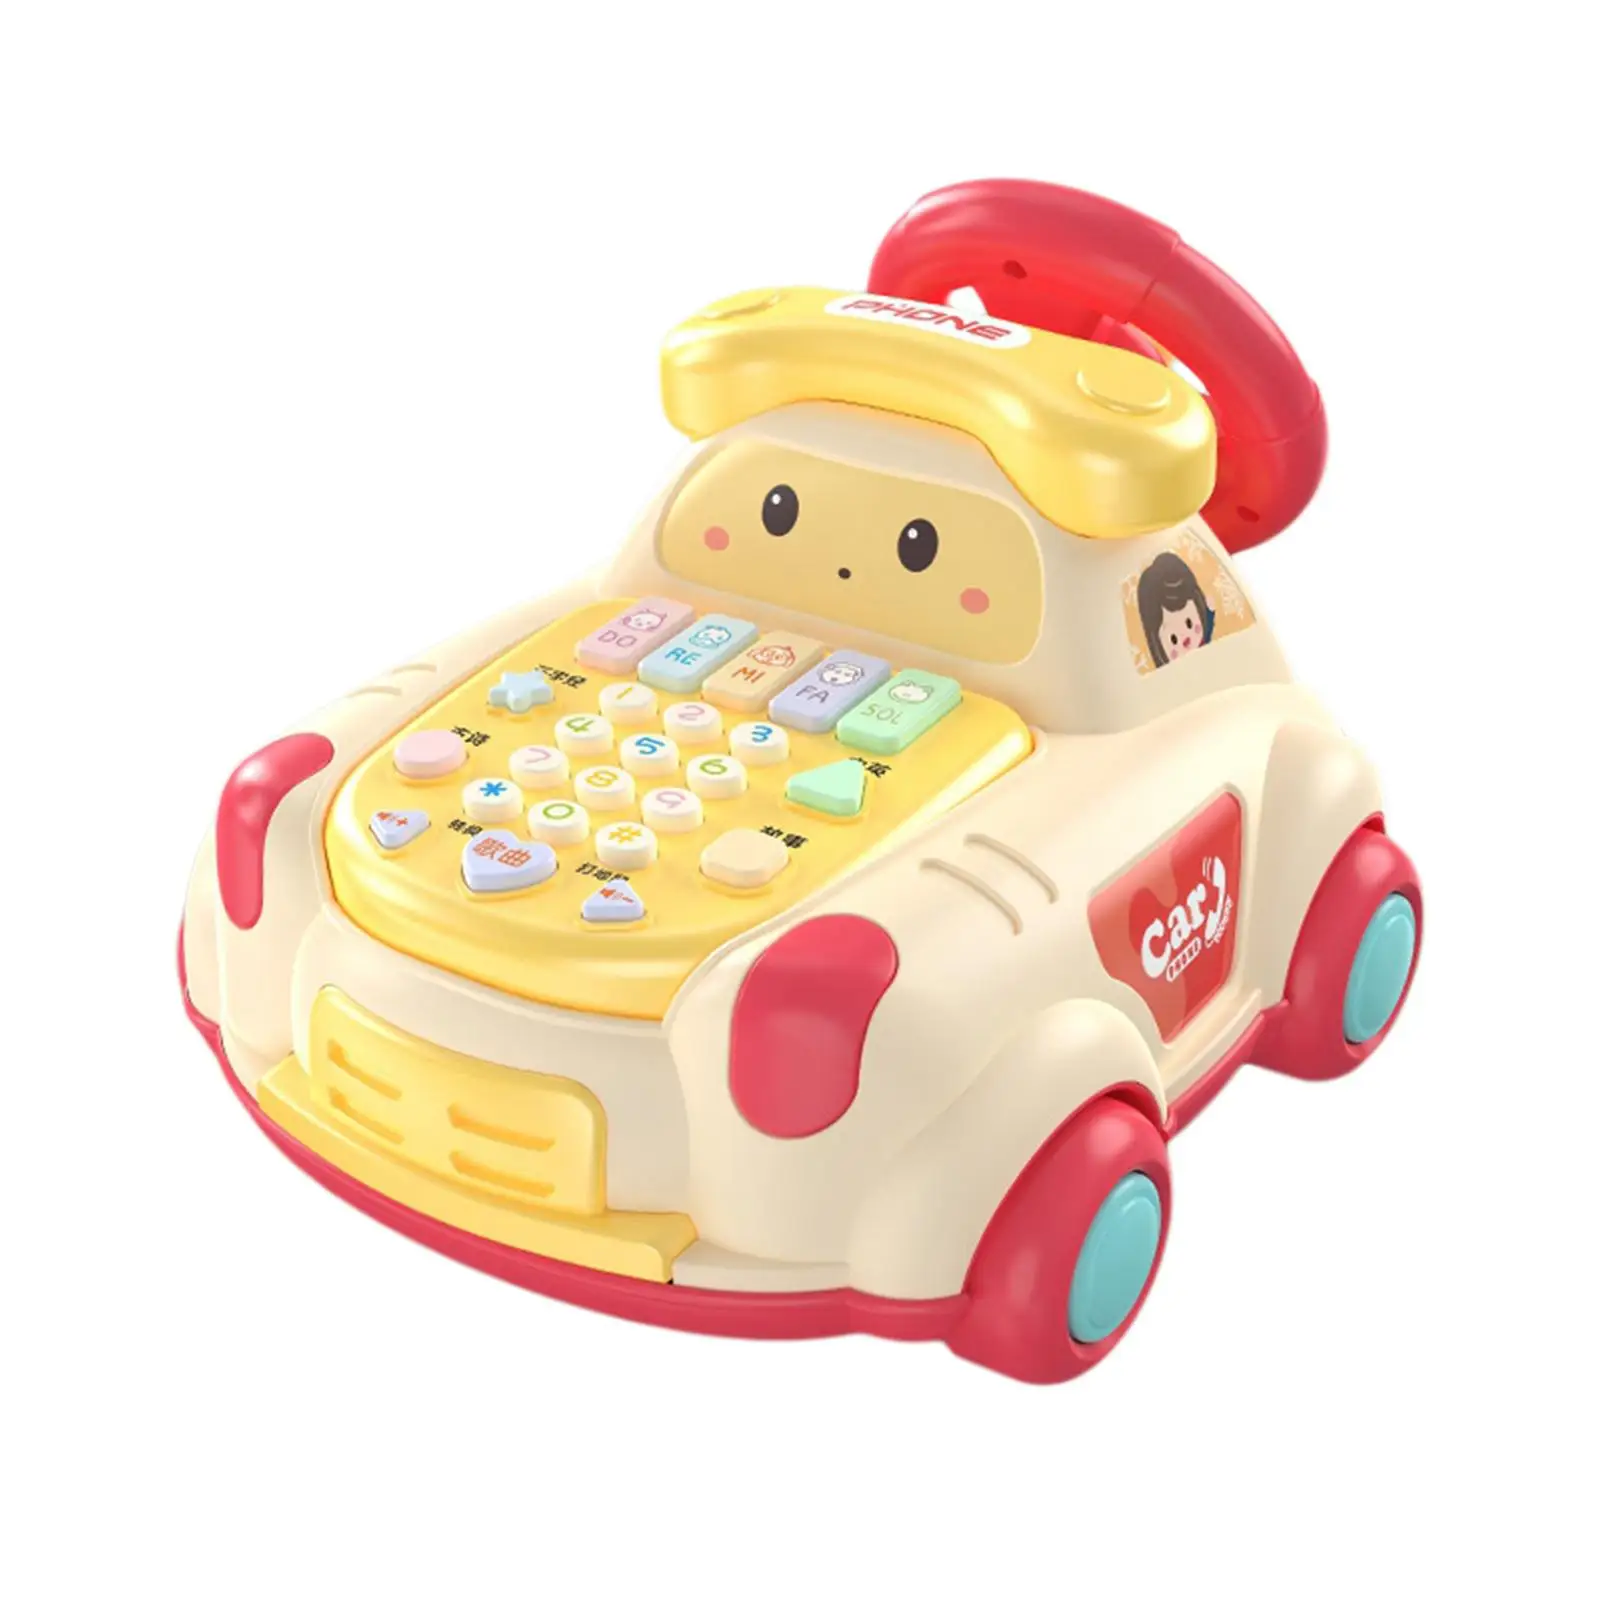 Music Light Phone Toy Educational Multifunctional toddlers Steering Wheel Car for Game Development Learning Education Preschool